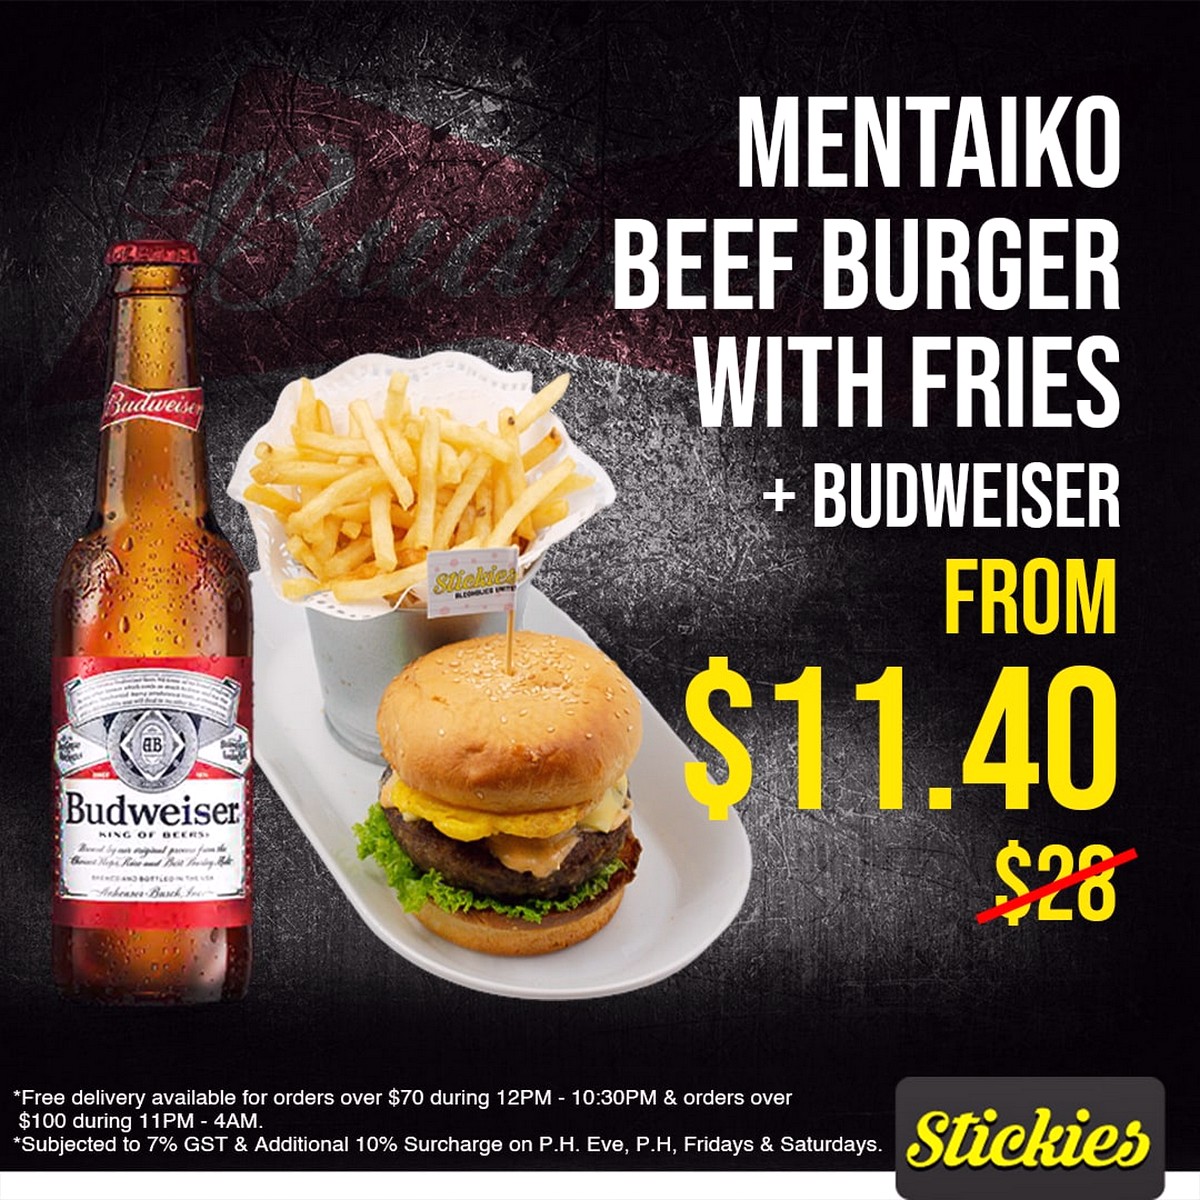 Stickies-Bar-Sitewide-Promo-Singapore-Beer-Wine-Soju-Alcoholic-Drinks-Western-Food-Fries-Burger-Discounts-2021-005 Today onwards: Stickies Bar Sitewide Promo! Up to 60% off Everything! Soju from $6.90 only!